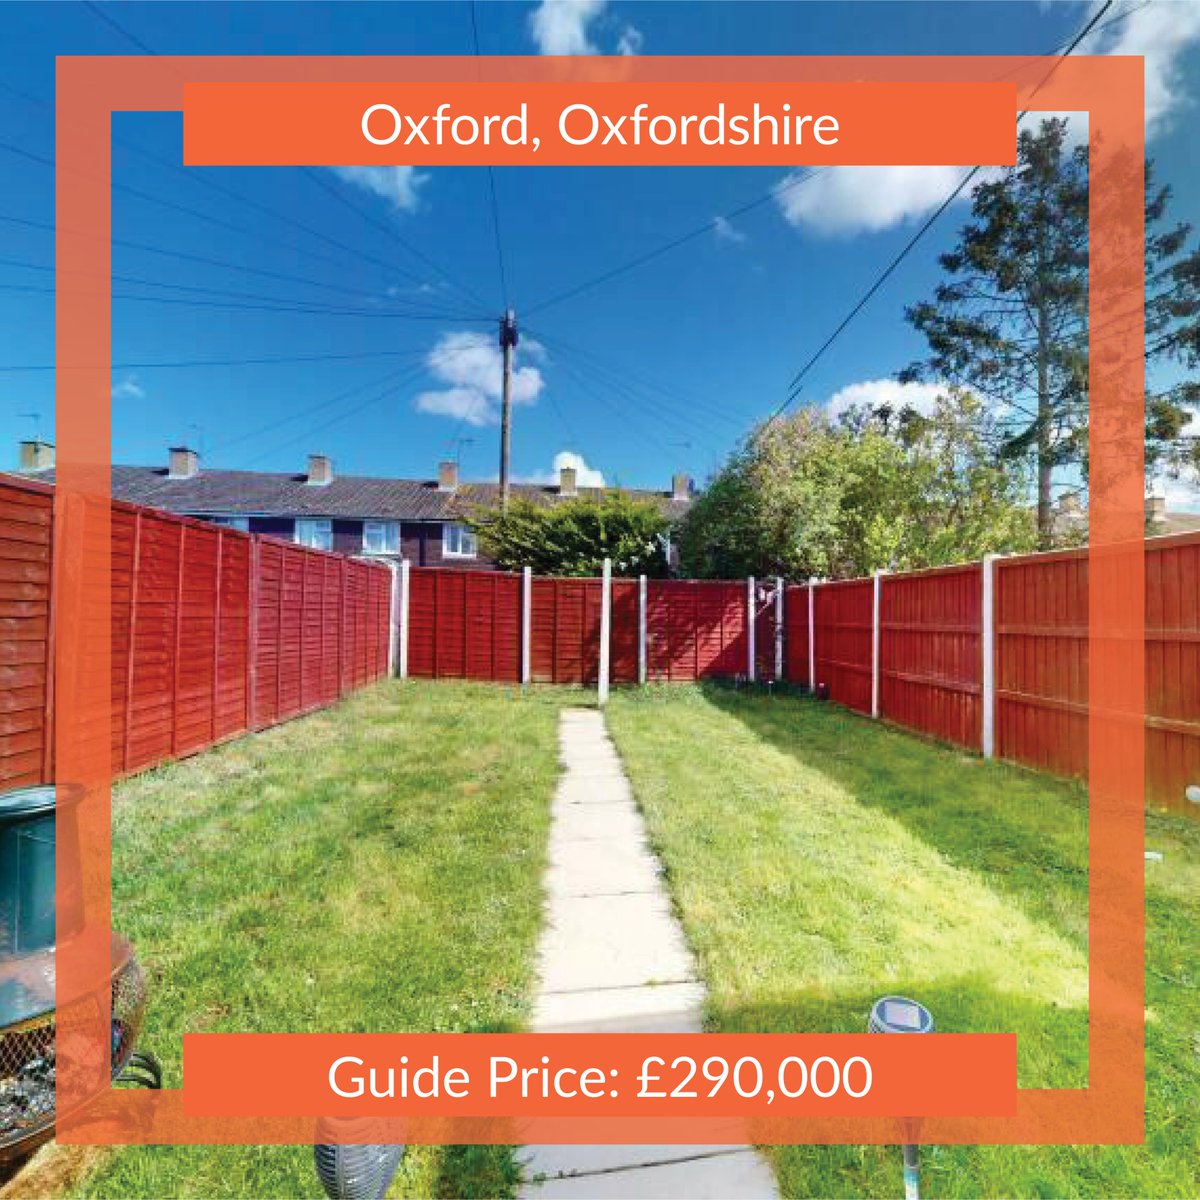 ⭐️#NewListing
🏡 3/4 Bedroom House in #Oxford #Oxfordshire
💷 Guide: £290,000
🗓 Auction: 16/05/24
📞 0800 038 5996
📧 info@whoobid.co.uk
🌐 Website: whoobid.co.uk/accueil/auctio…

#Whoobid #PropertyAuction #PropertyInvestment #PropertyListing #UKProperty